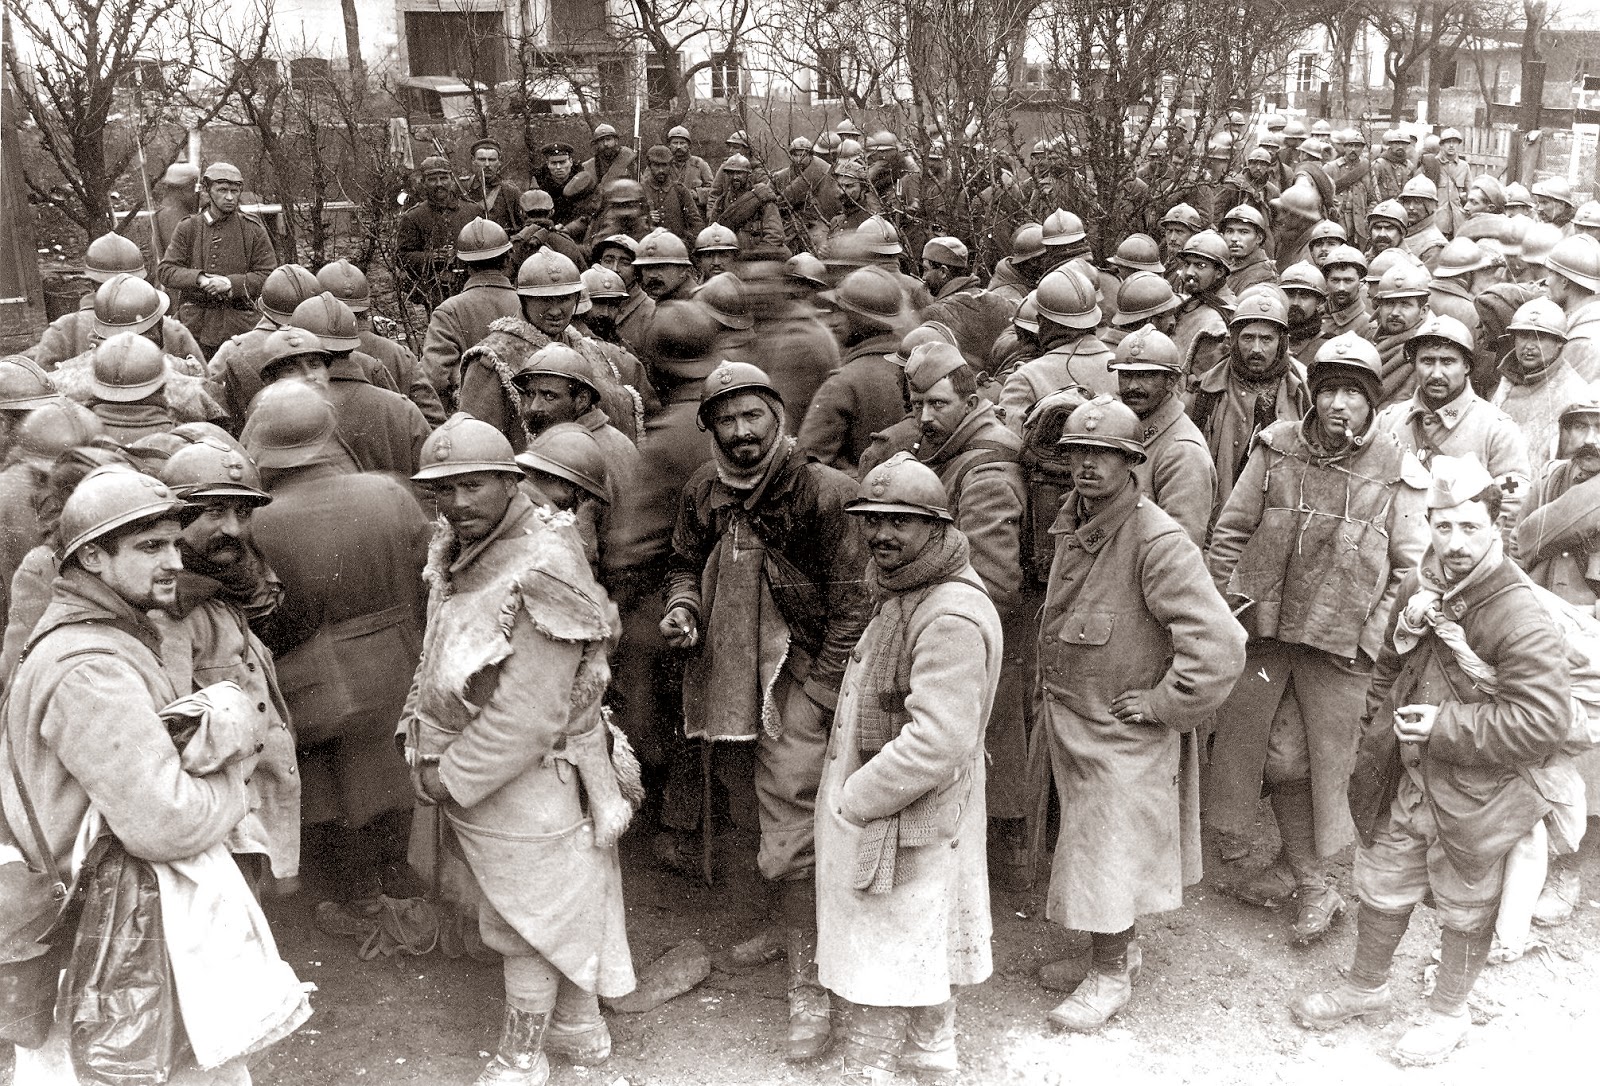 German soldiers waiting to be mobilized to a new destiny in northern France.